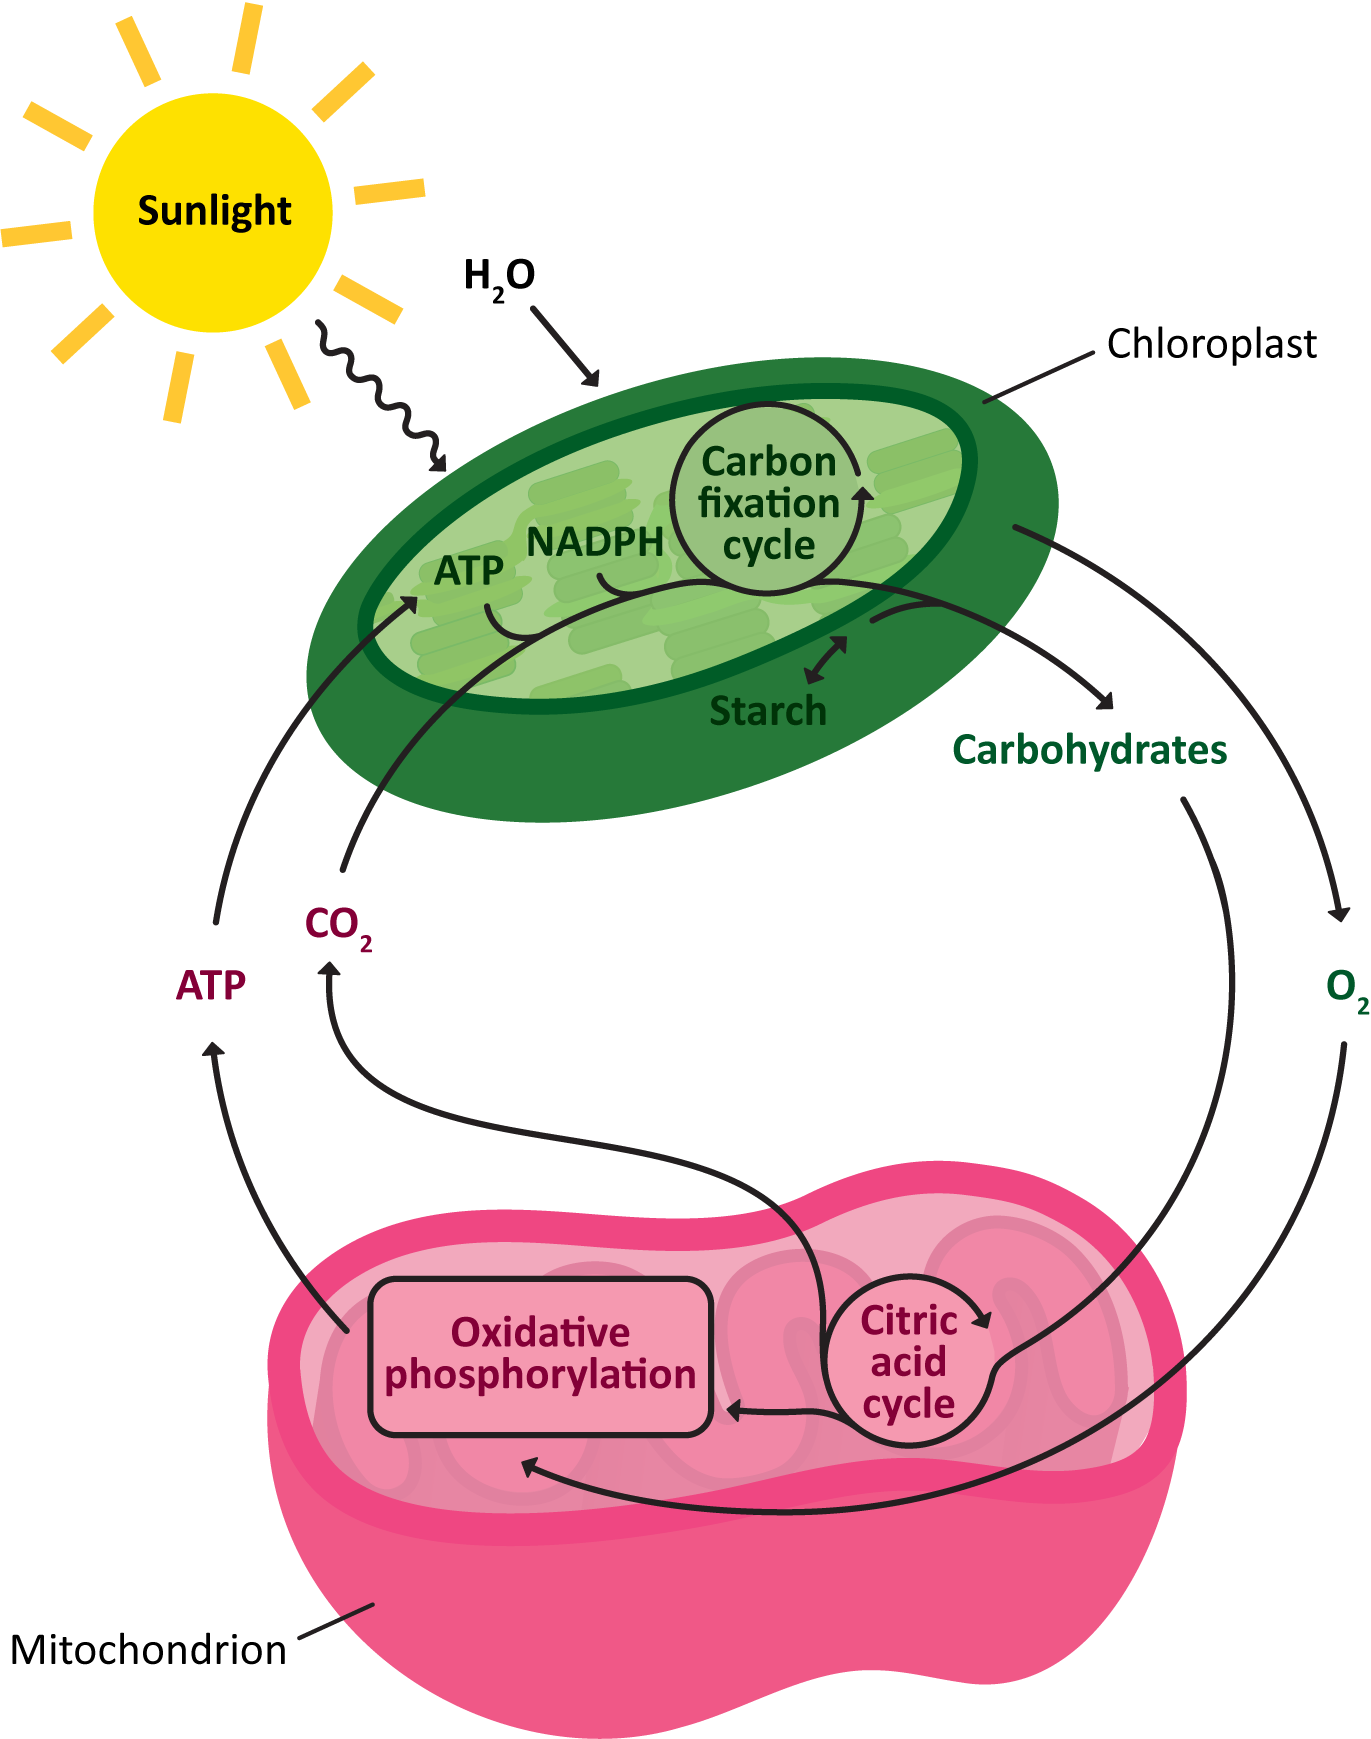 Relationship cycle of mitochondria and chloroplasts.